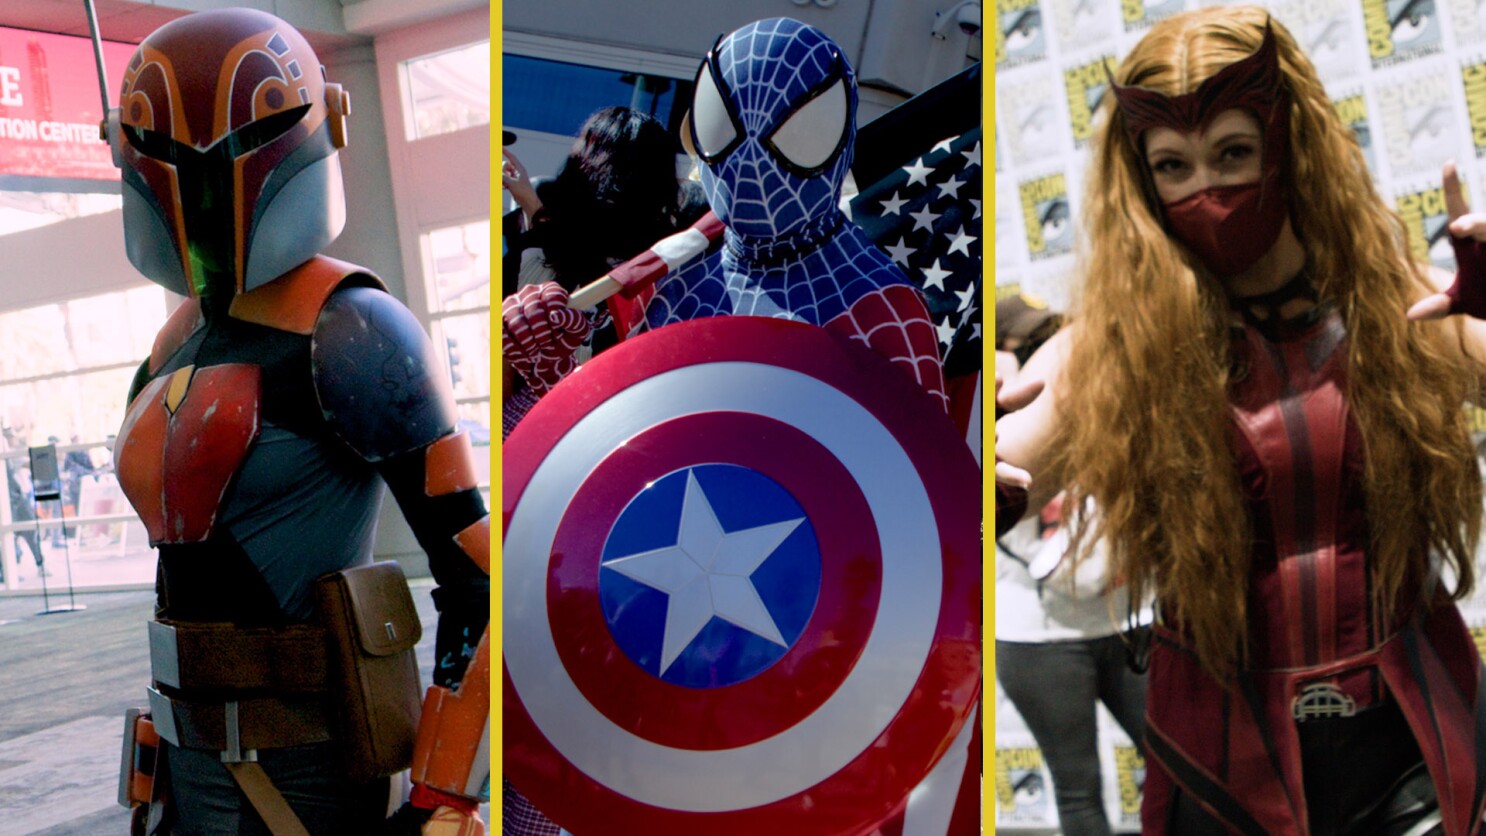 Comic Con Returns To San Diego Amid Covid 19 Pandemic Los Angeles Times